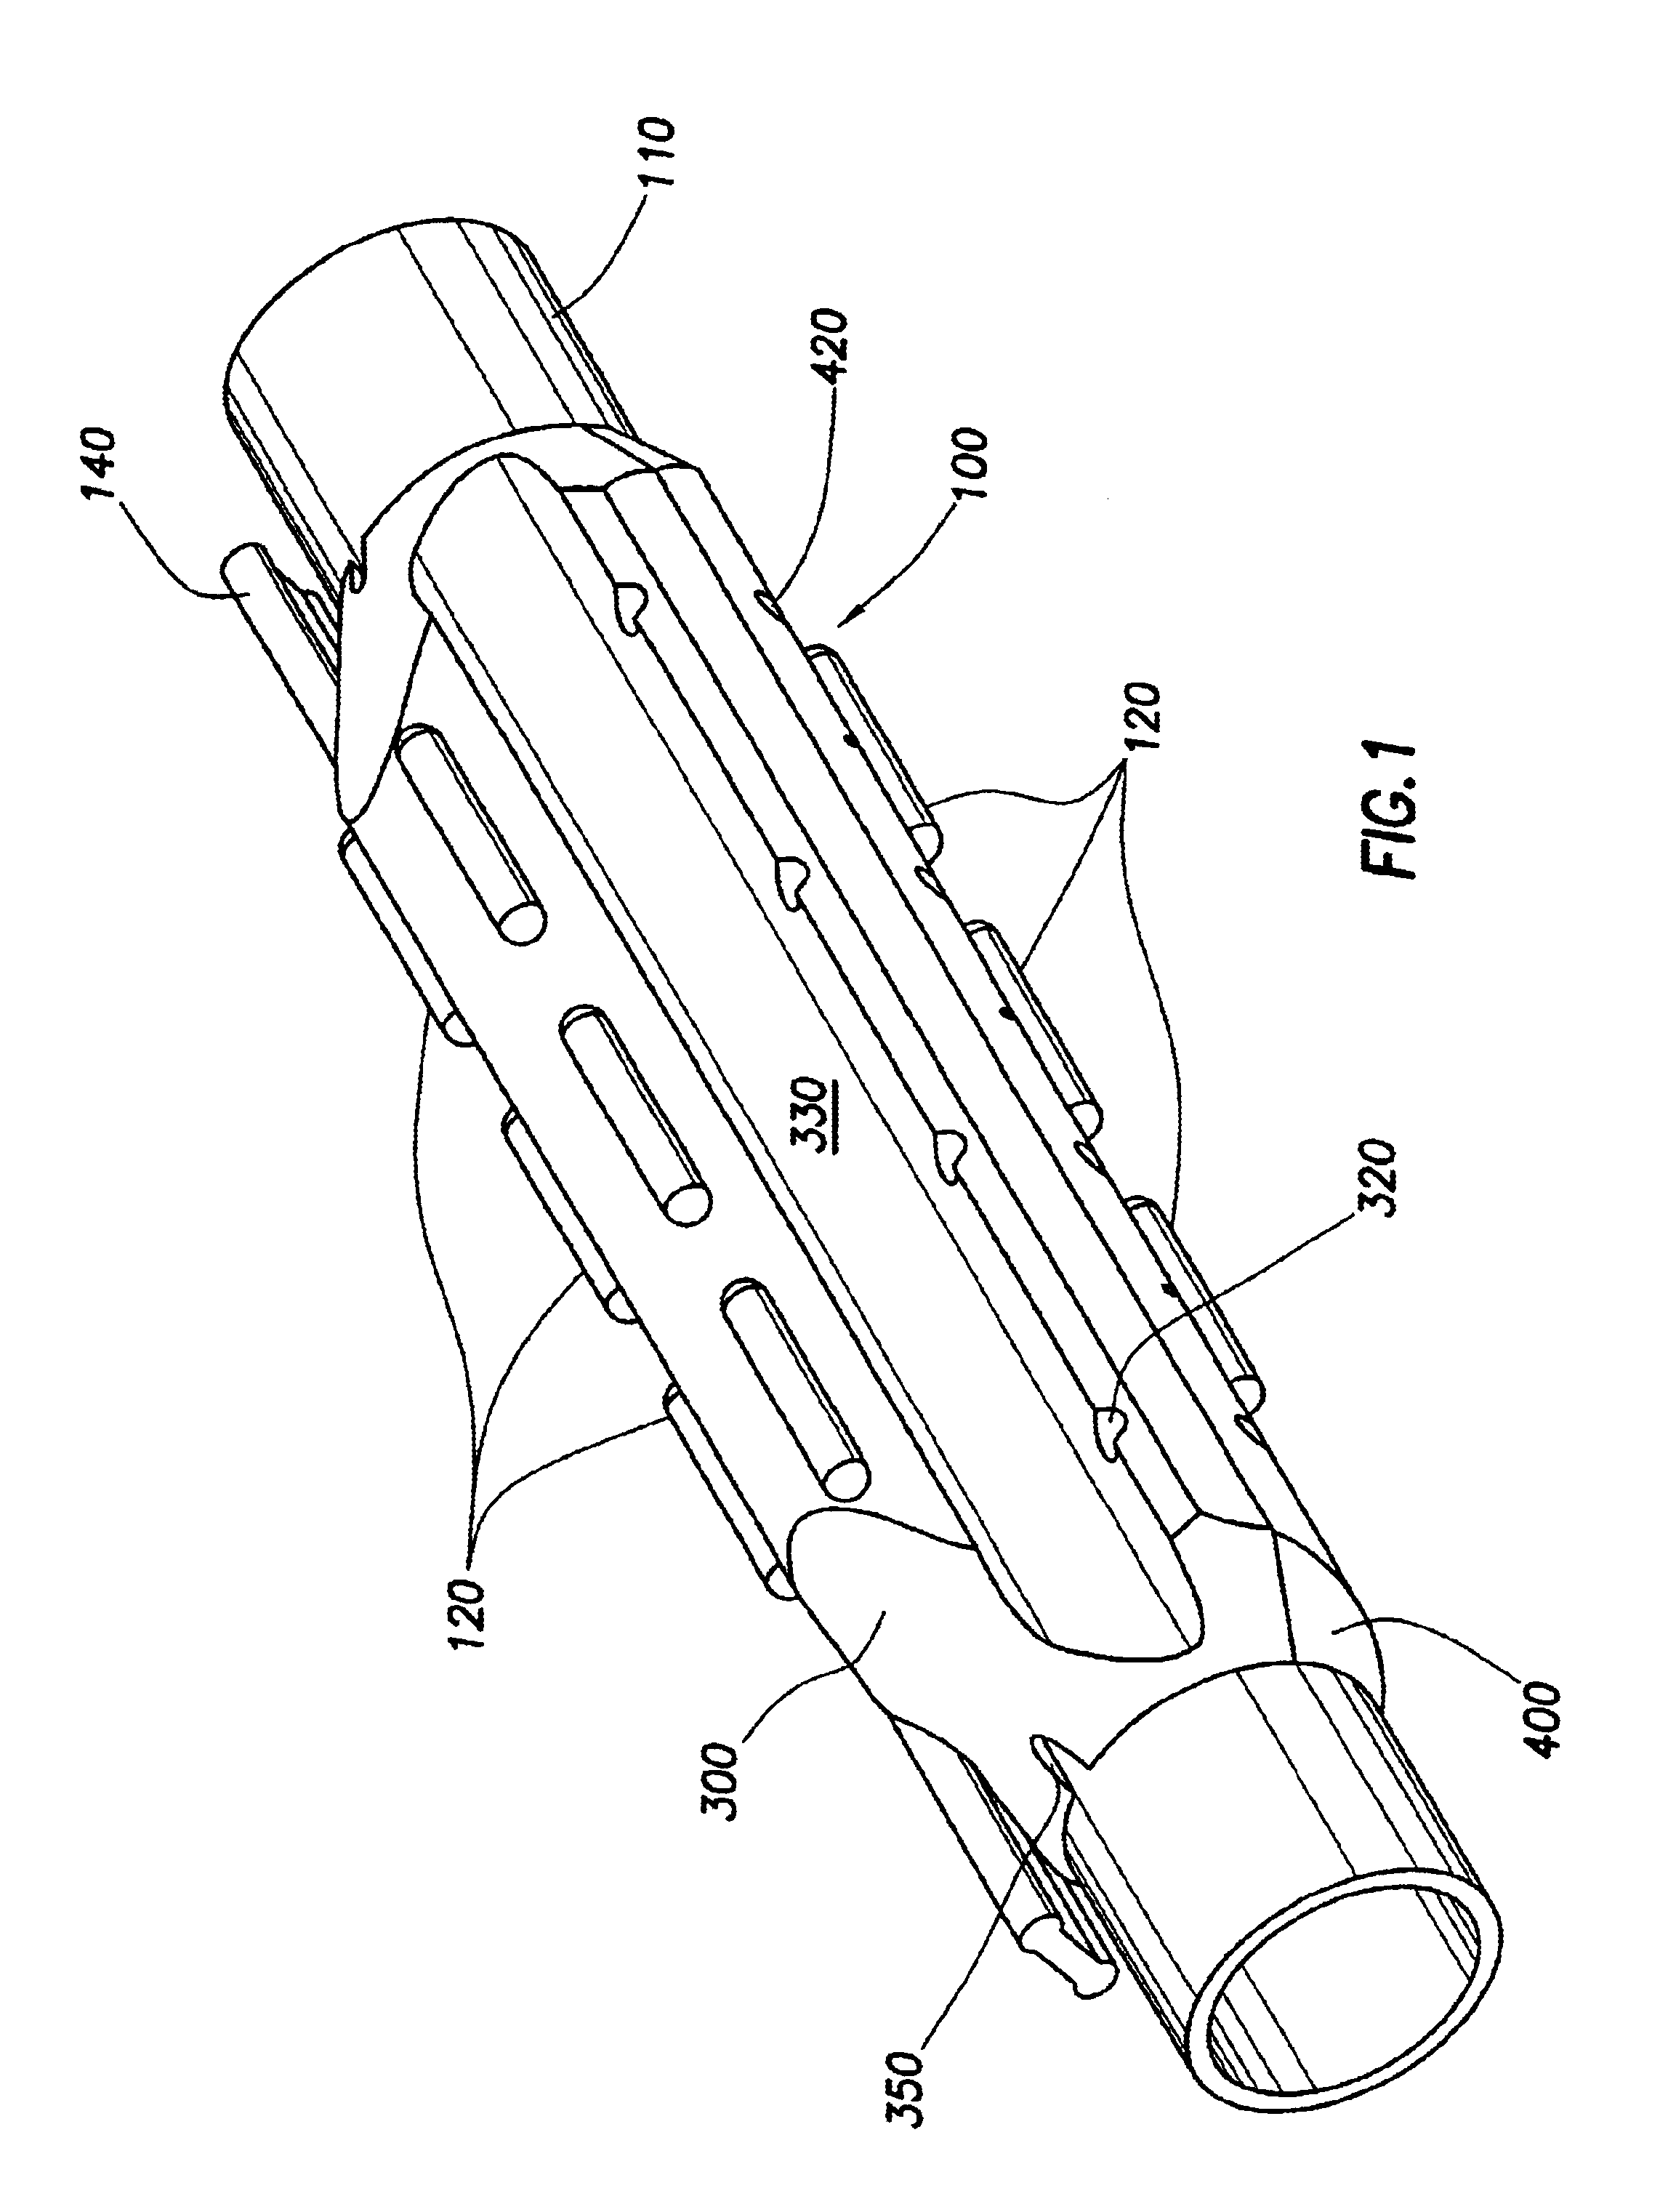 Apparatus for attaching a sensor to a tubing string